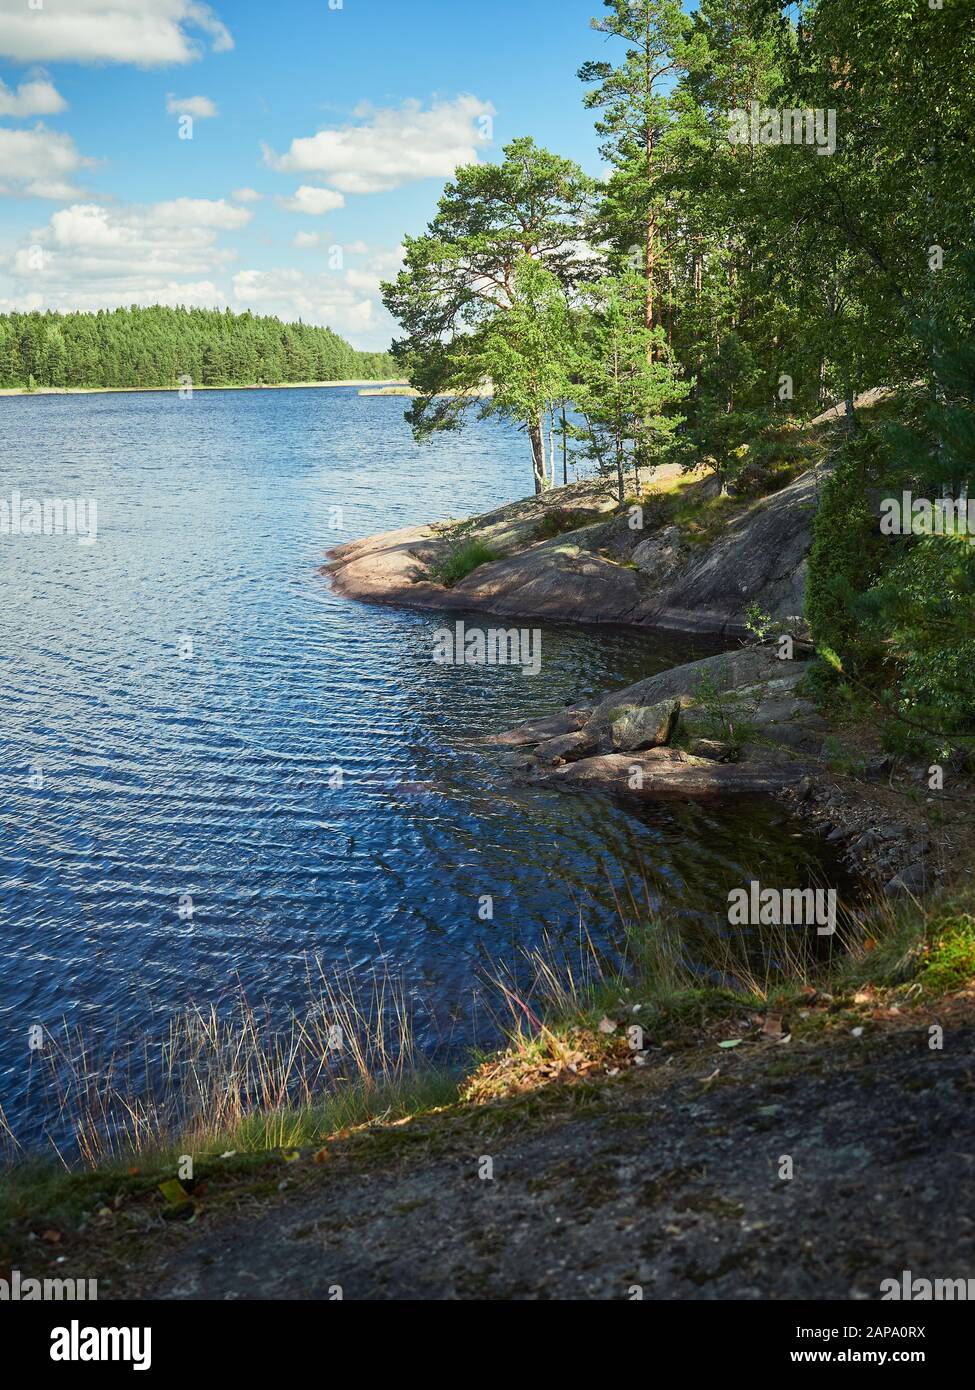 Idyllic Finnish summer lake scene at Teijo hiking trail in Salo, Finland. Big tree and the Matildajarvi lake on the background. Stock Photo